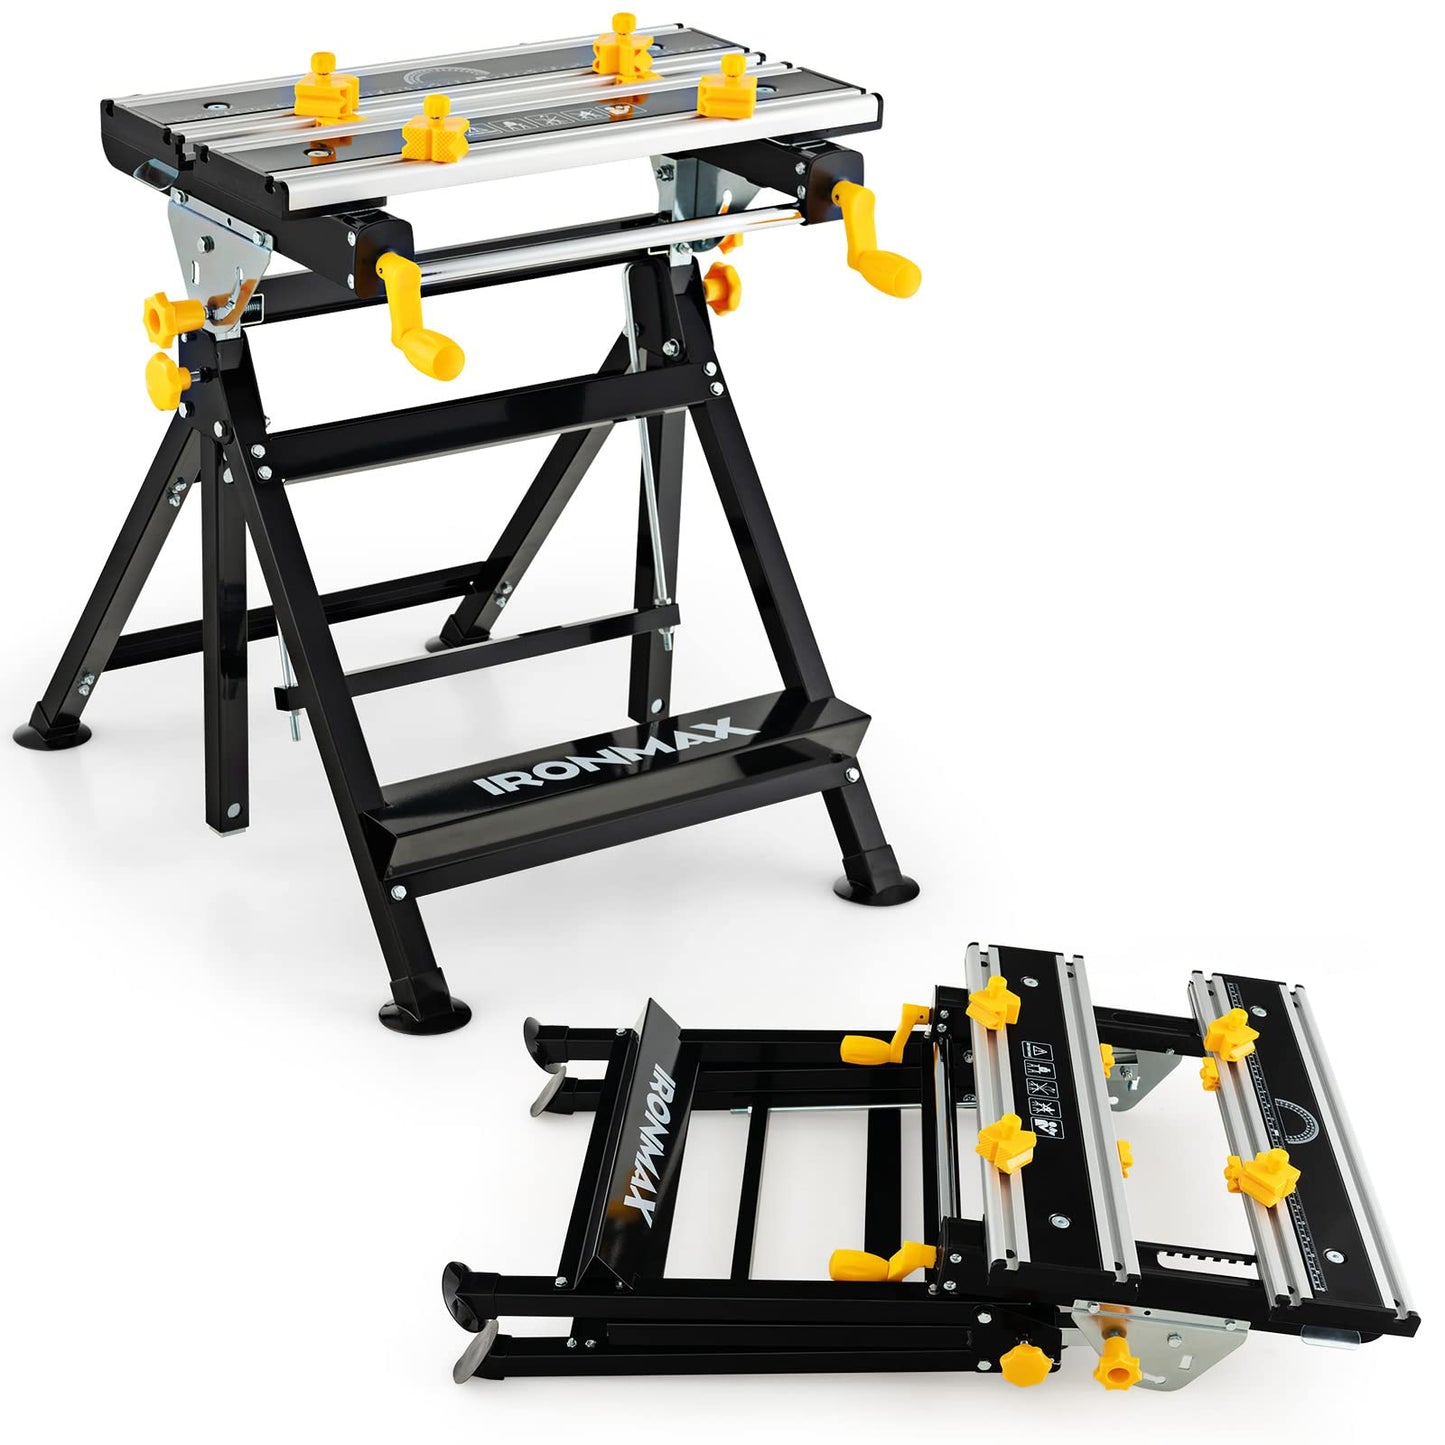 GOFLAME Portable Workbench, Multifunctional Folding Workstation with Tiltable Platform, 7-level Adjustable Height and Sliding Clamps, Welding Table